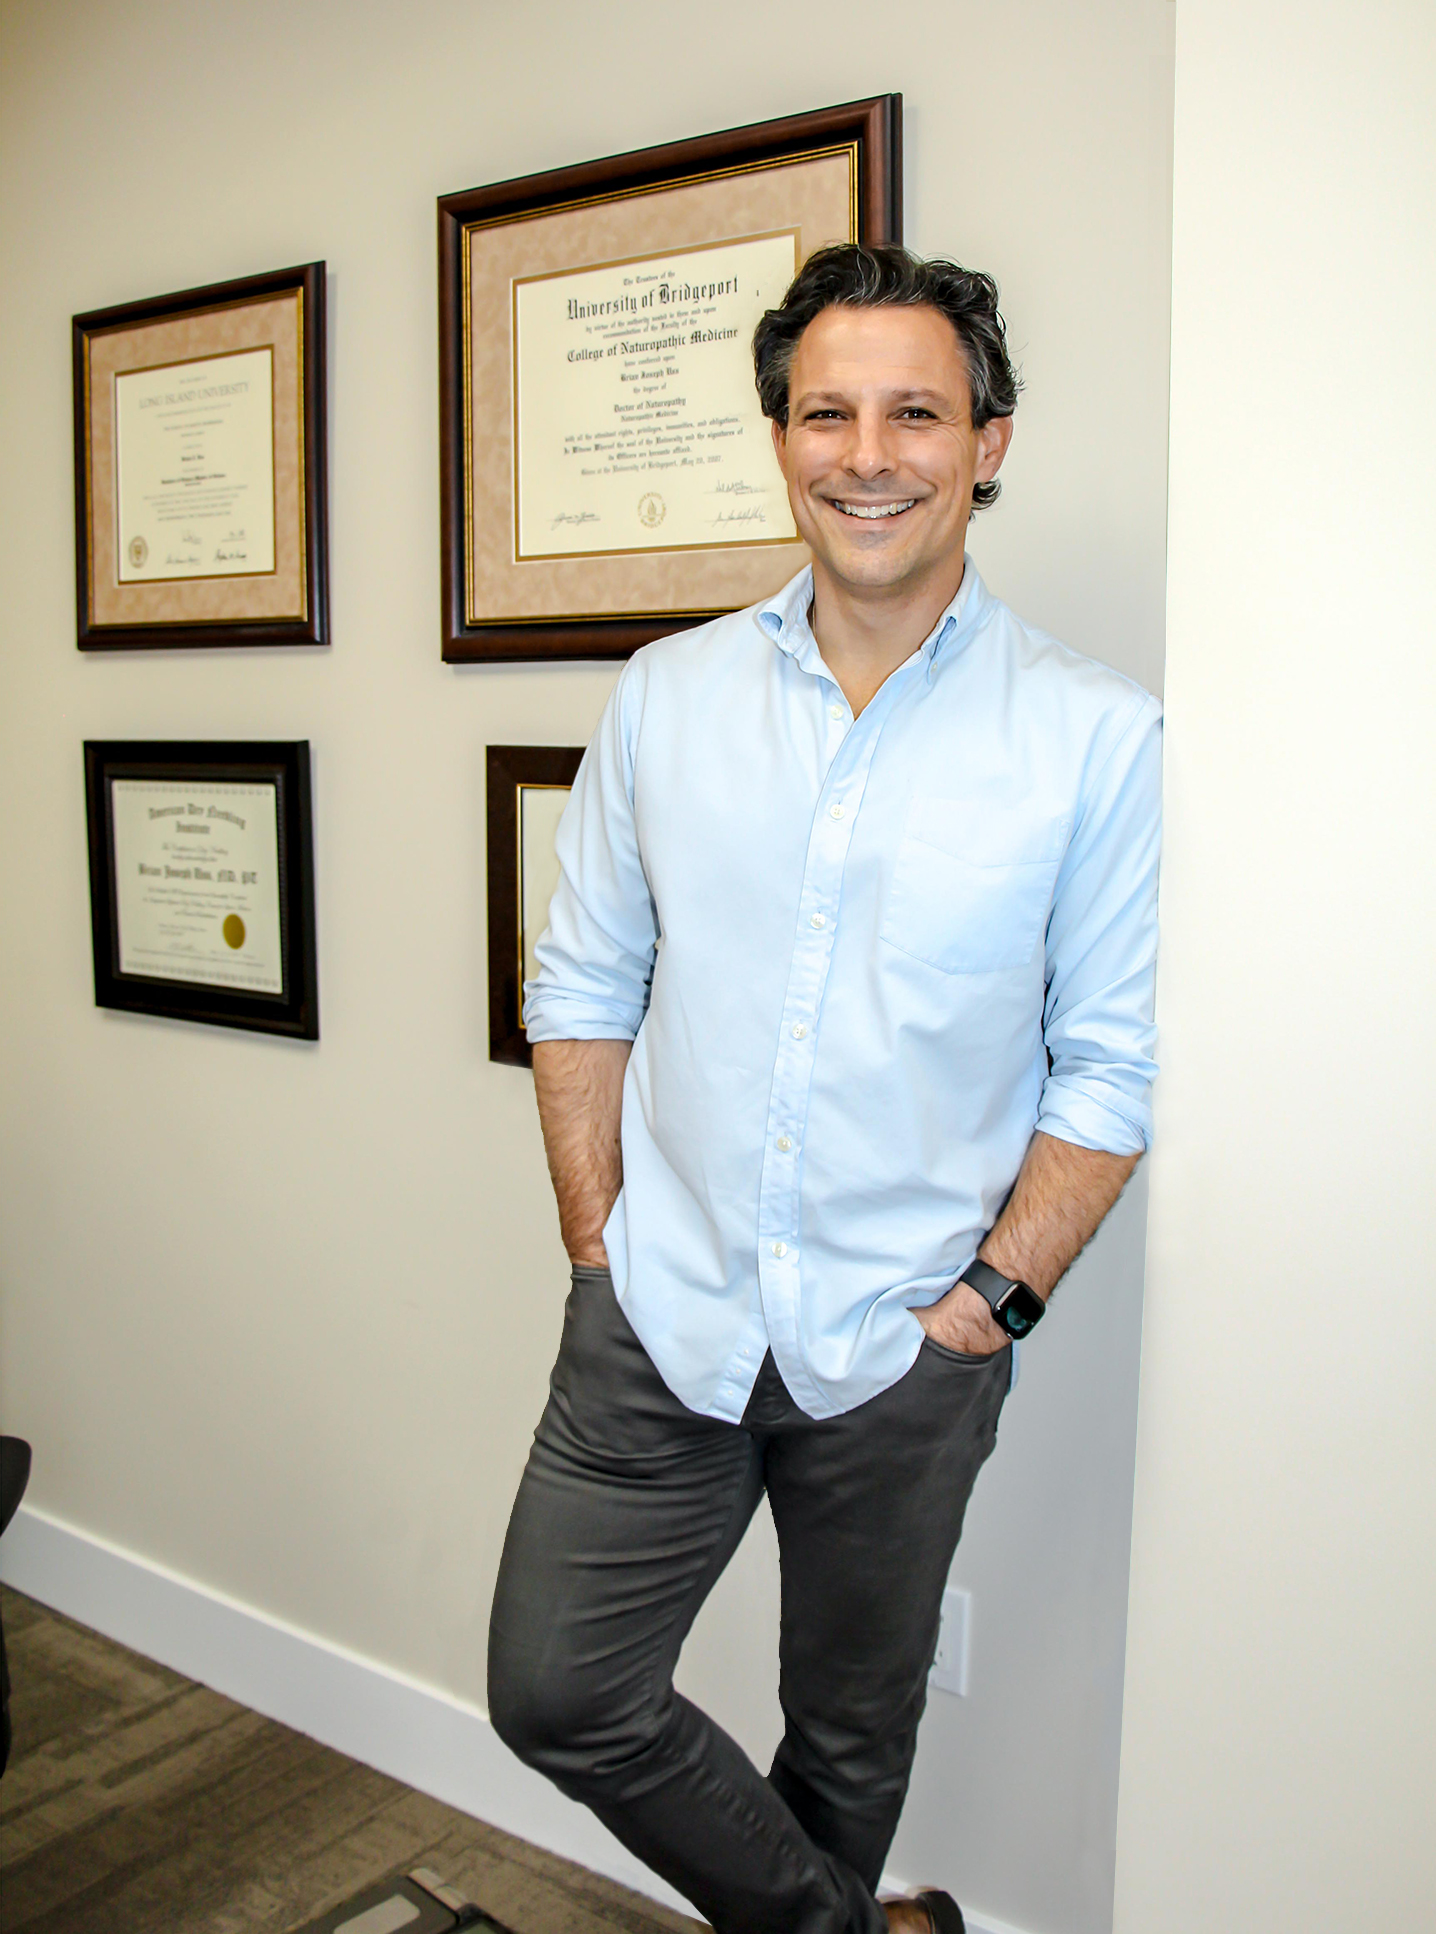 Dr. Brian J. Uss, Naturopathic Physician specializing in Physical and Functional Medicine